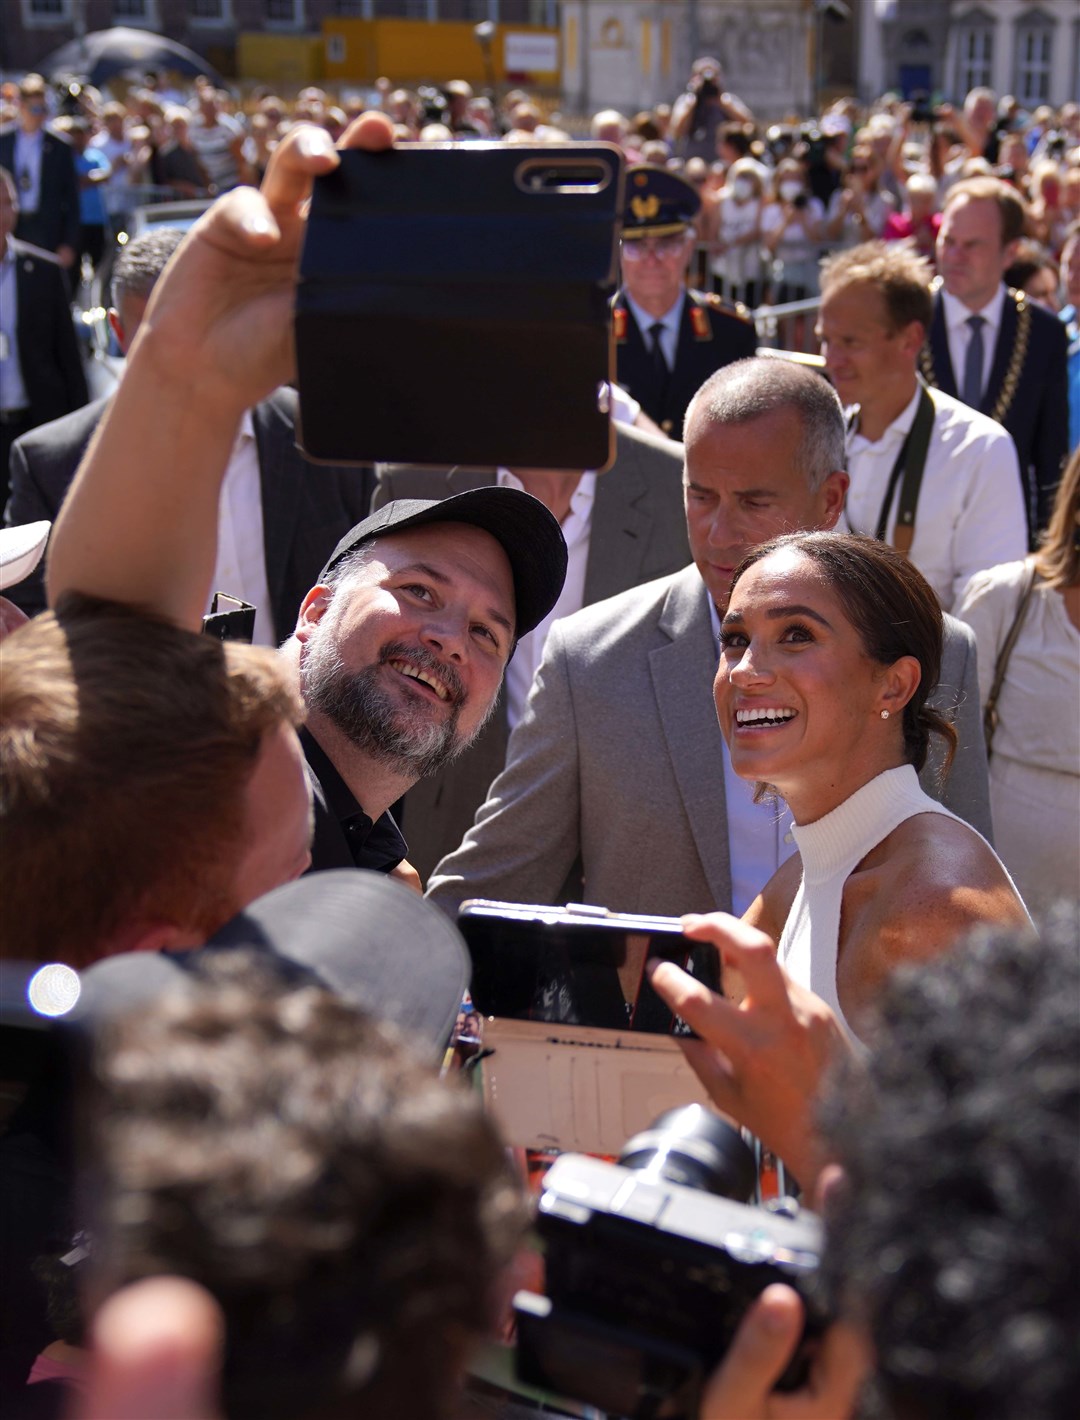 Meghan meets well-wishers after leaving City Hall in Dusseldorf, Germany on Tuesday (Joe Giddens/PA)